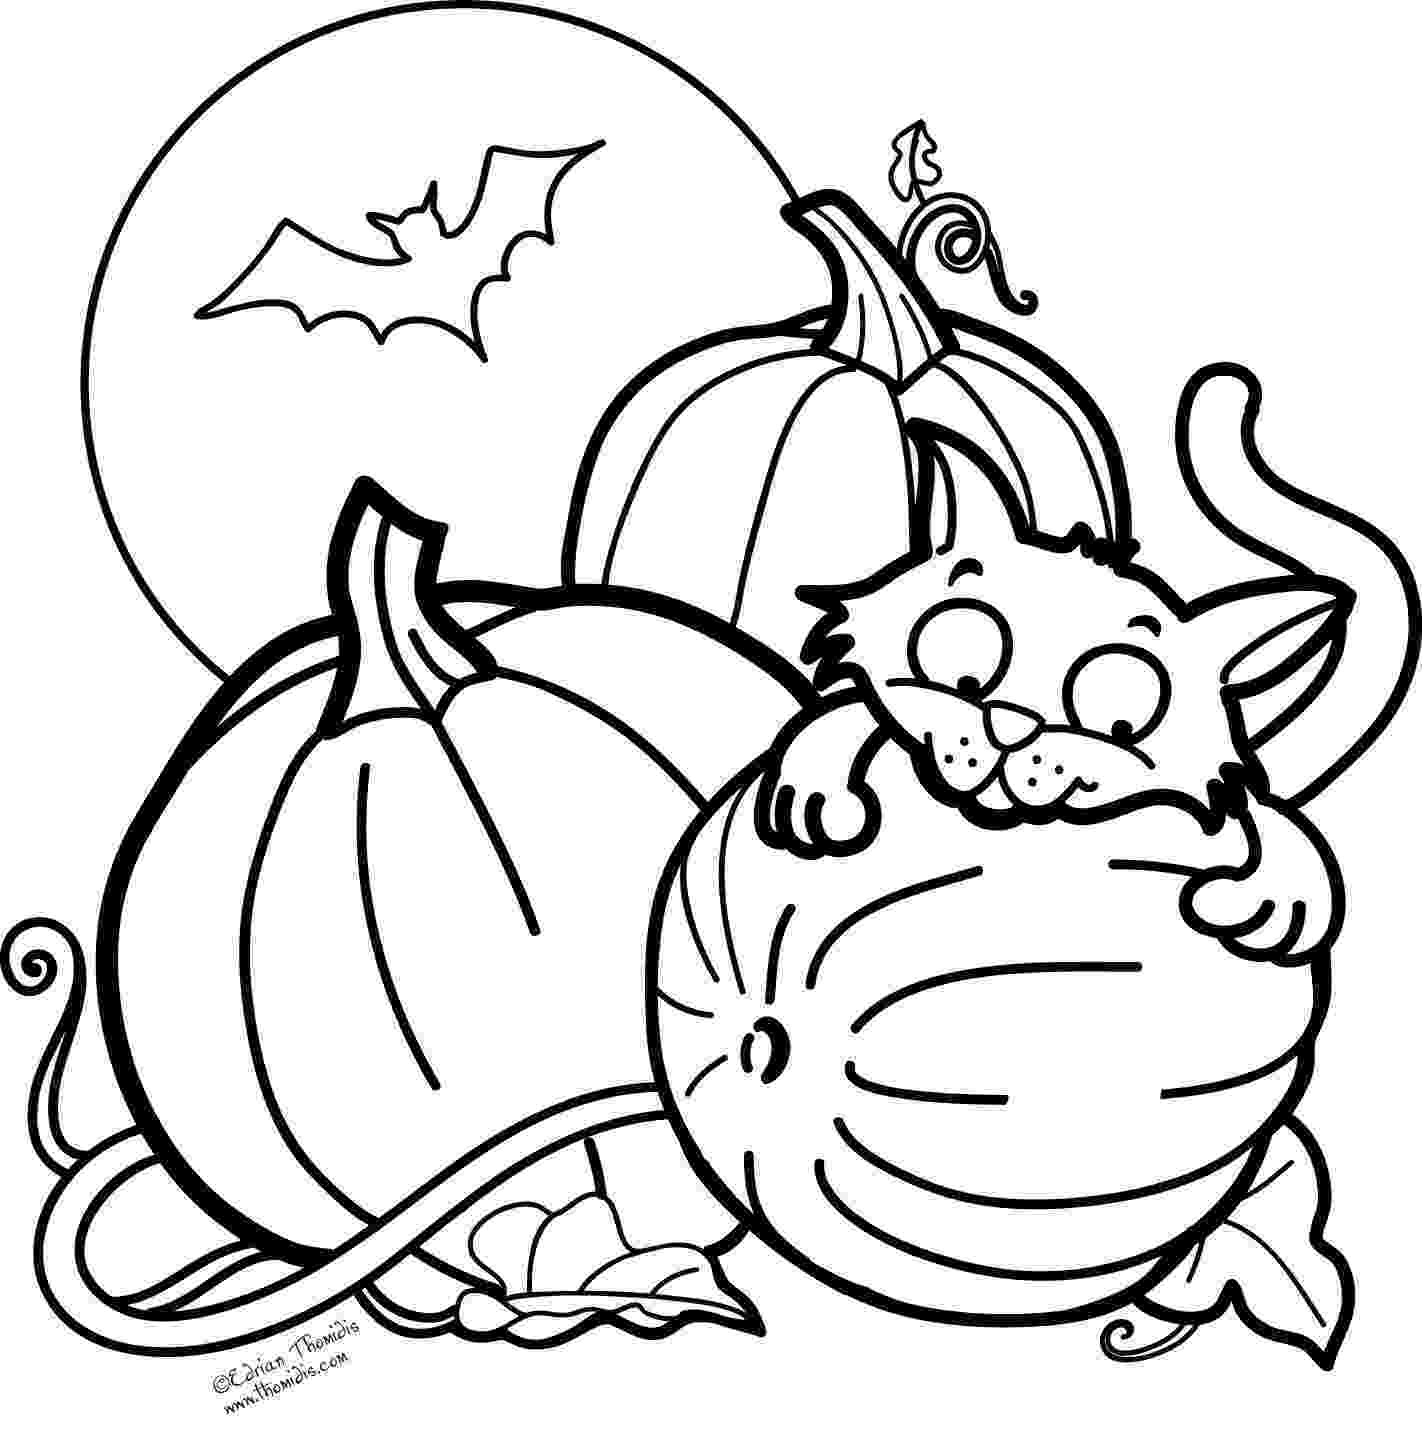 halloween pumpkin pictures to print and color halloween pumpkin coloring pages getcoloringpagescom halloween and to pumpkin print color pictures 